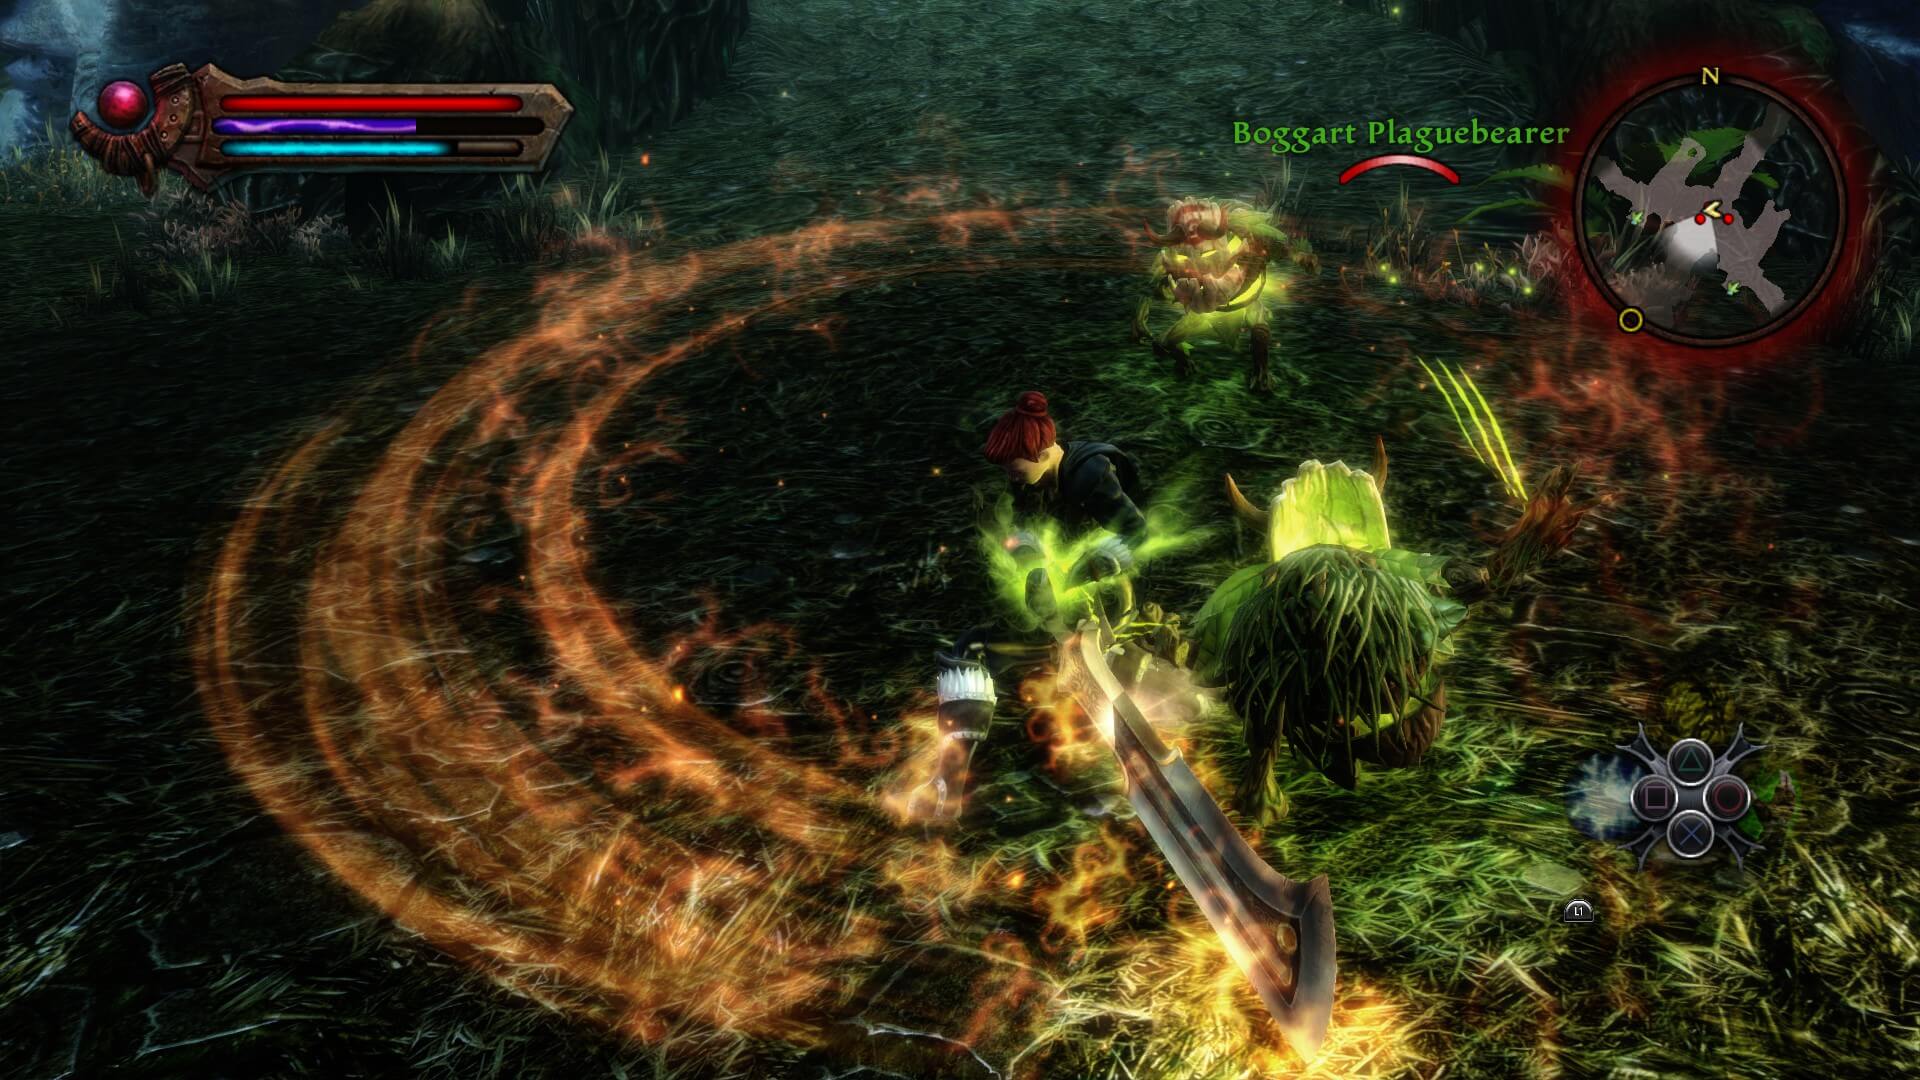 The player fighting through creatures with a flaming greatsword